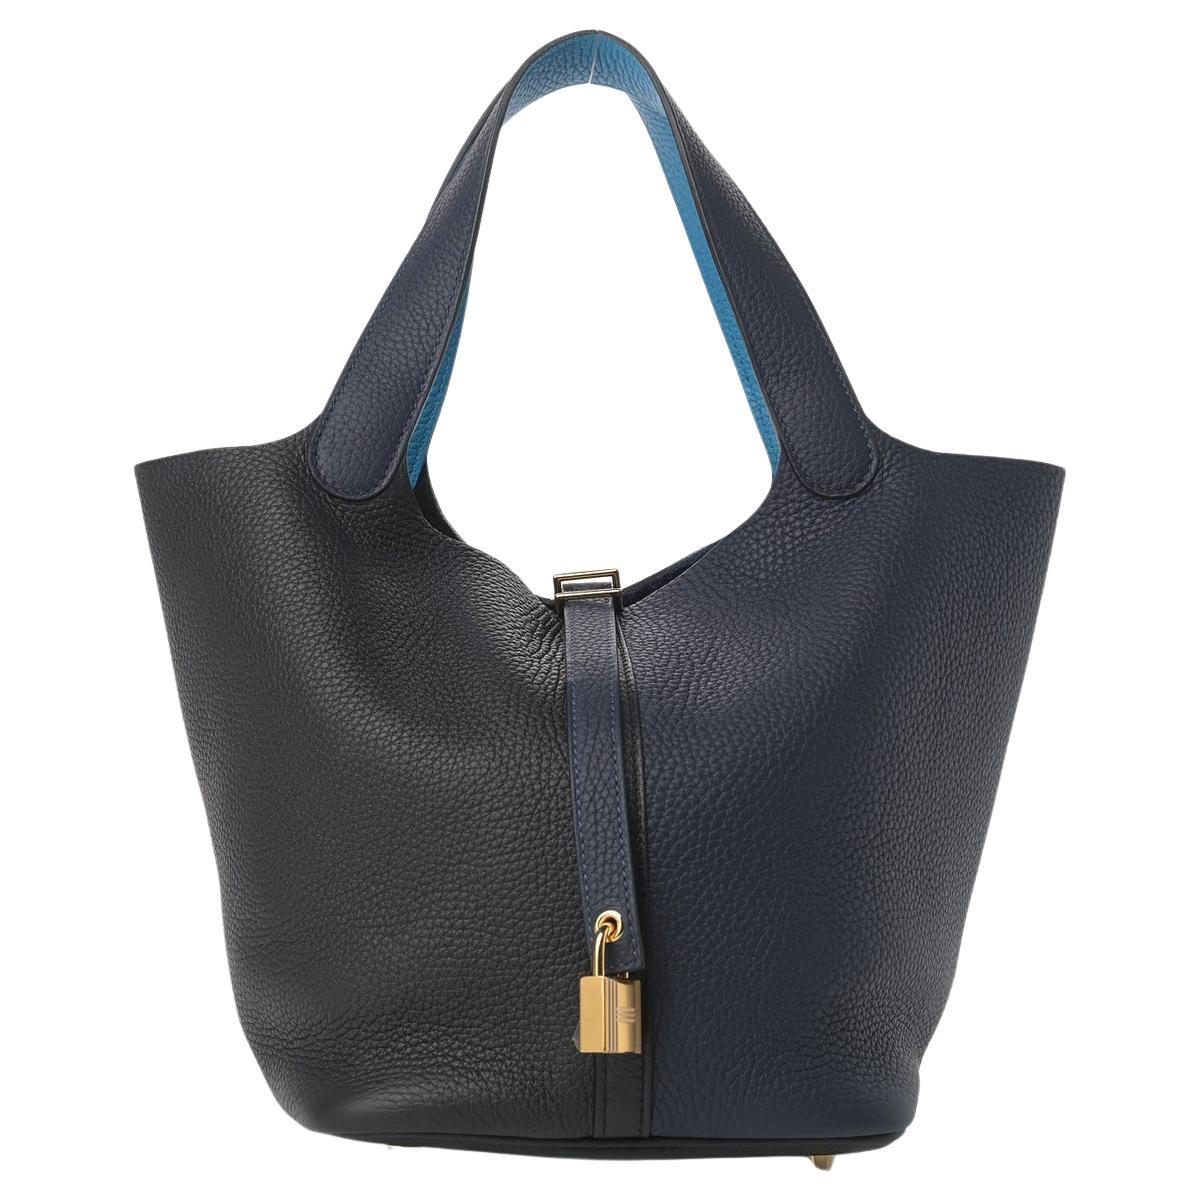 HERMES NEW Picotin 22 Navy Blue Black Leather Gold Small Top Handle Bucket Bag